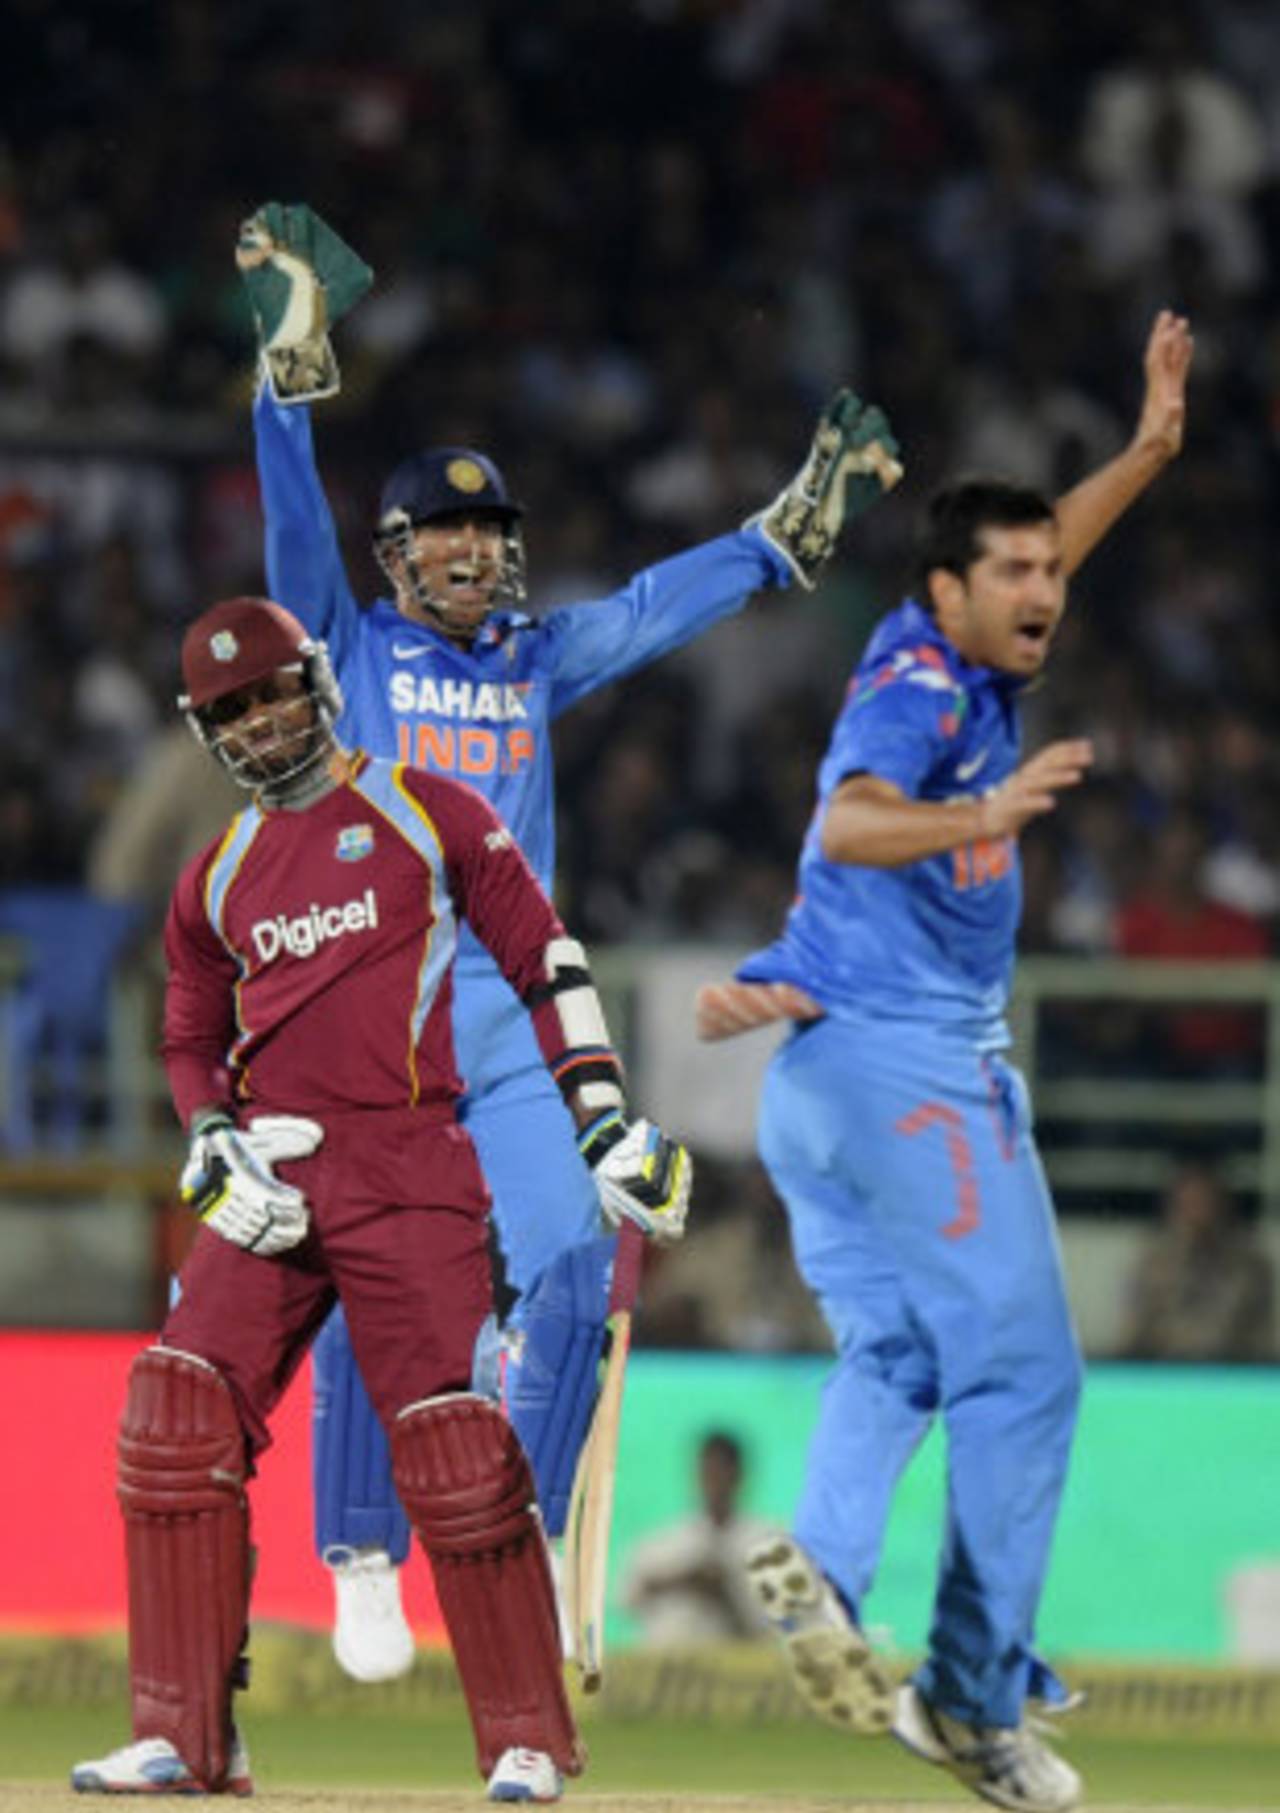 Marlon Samuels was caught behind by MS Dhoni for 8, India v West Indies, 2nd ODI, Visakhapatnam, November 24, 2013